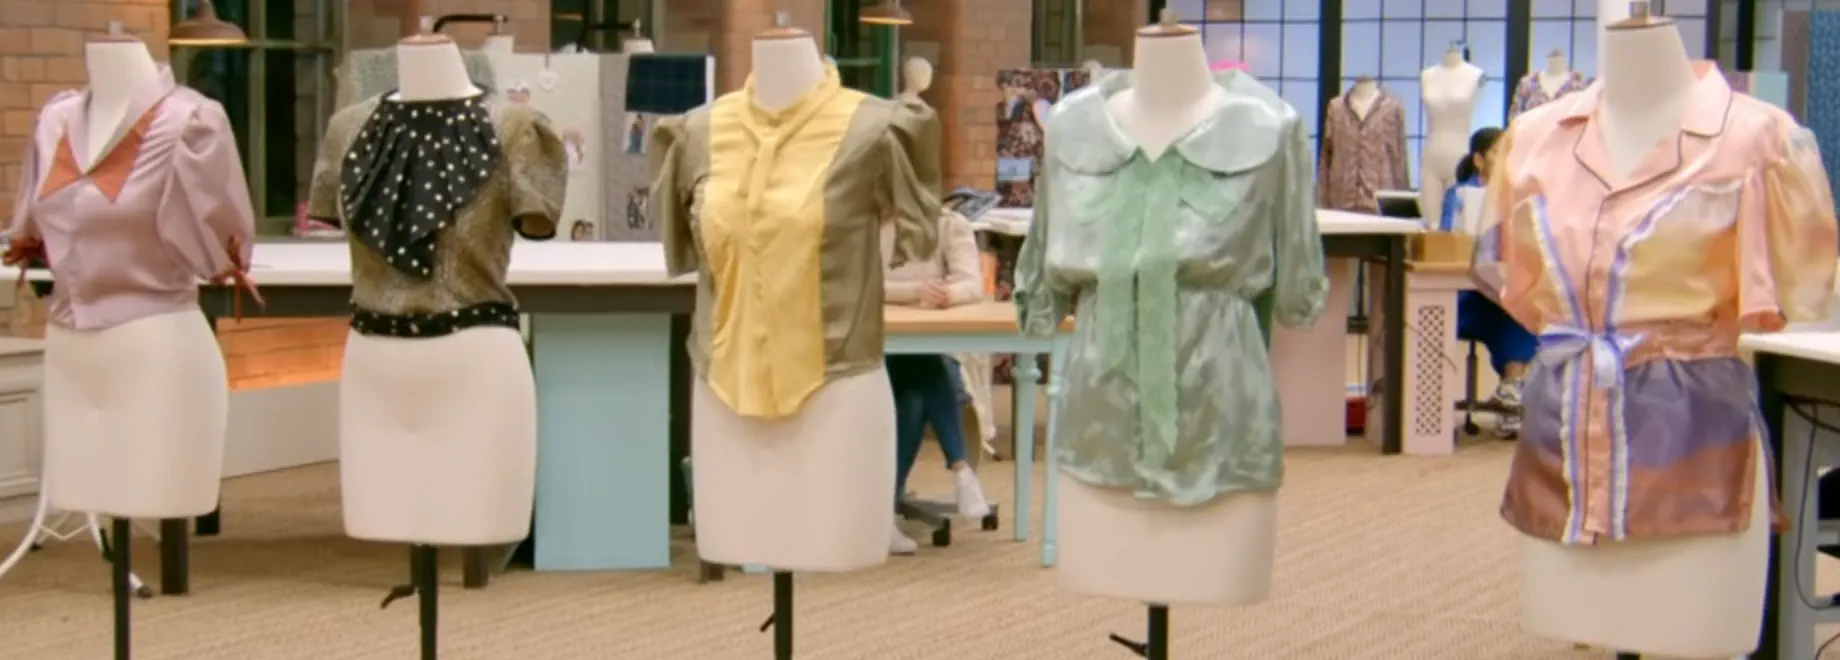 Five 1930s style women's blouses on mannequins, created by upcycling men's shirts